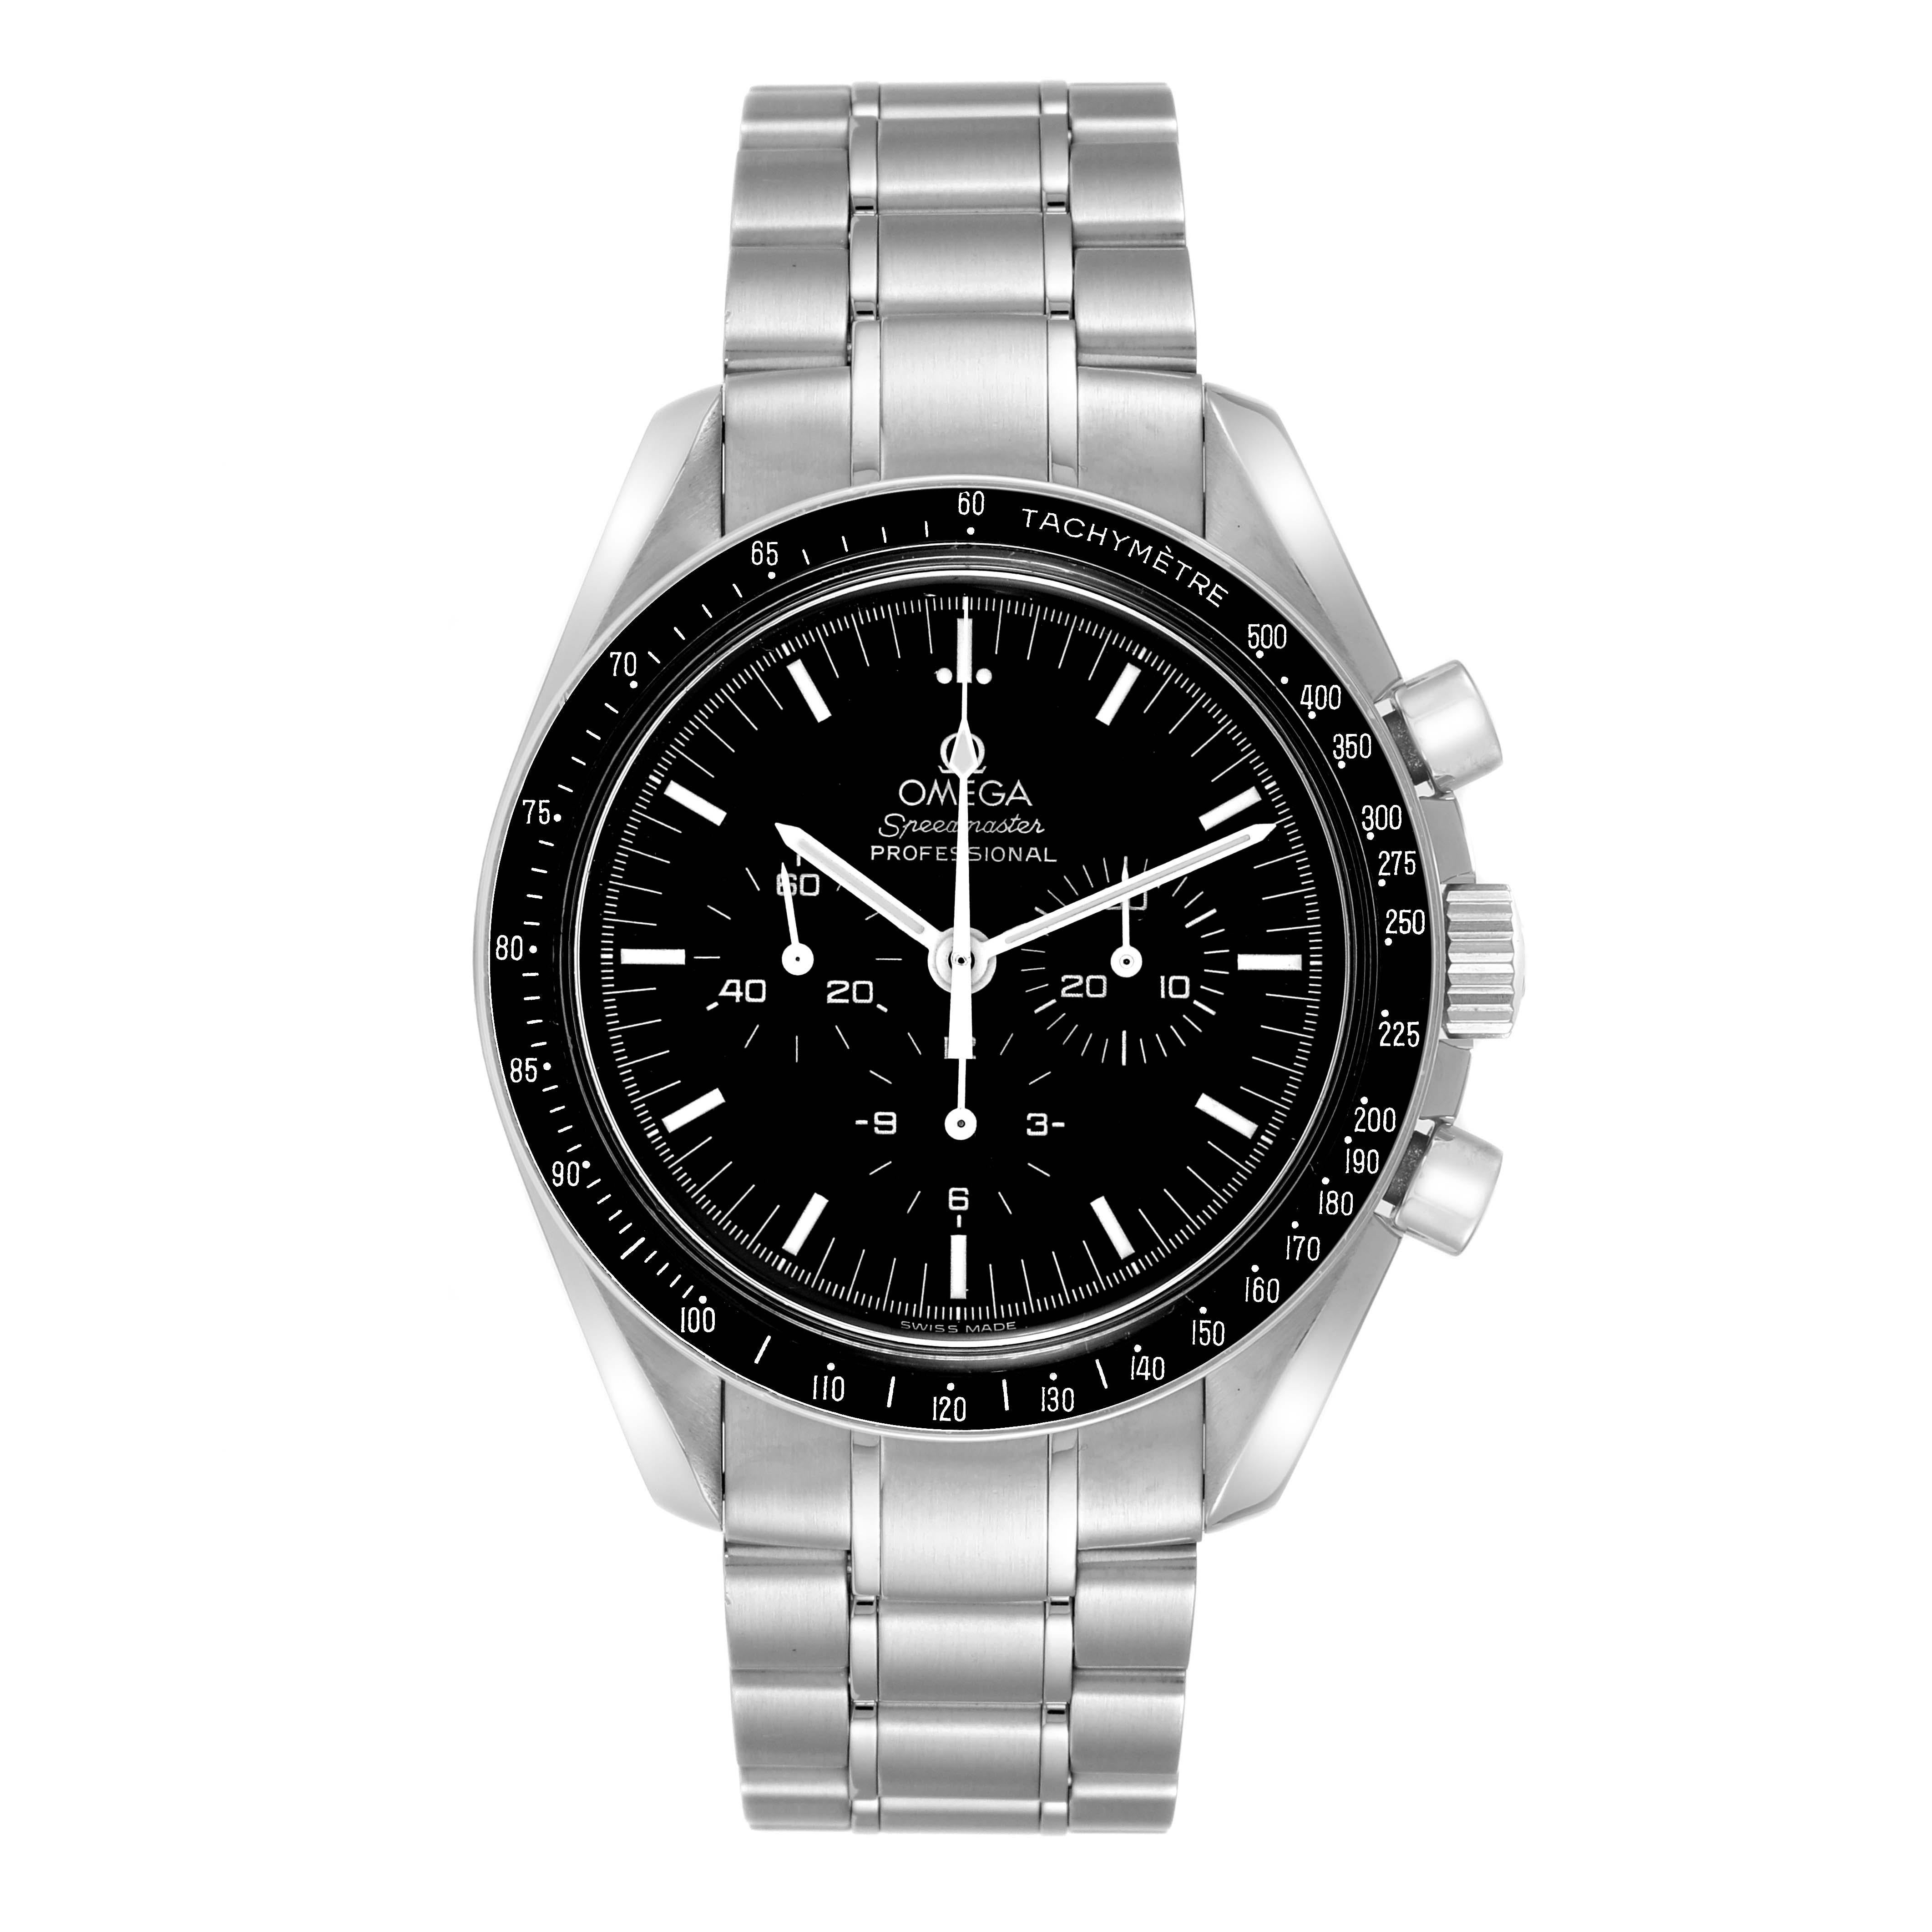 Omega Speedmaster Apollo XVII Limited Edition Mens Watch 3574.51.00 Box Card. Manual winding chronograph movement. Stainless steel round case 42.0 mm in diameter. Special Last Man on the Moon Caseback commemorating E. A. Cernan's Apollo XVII